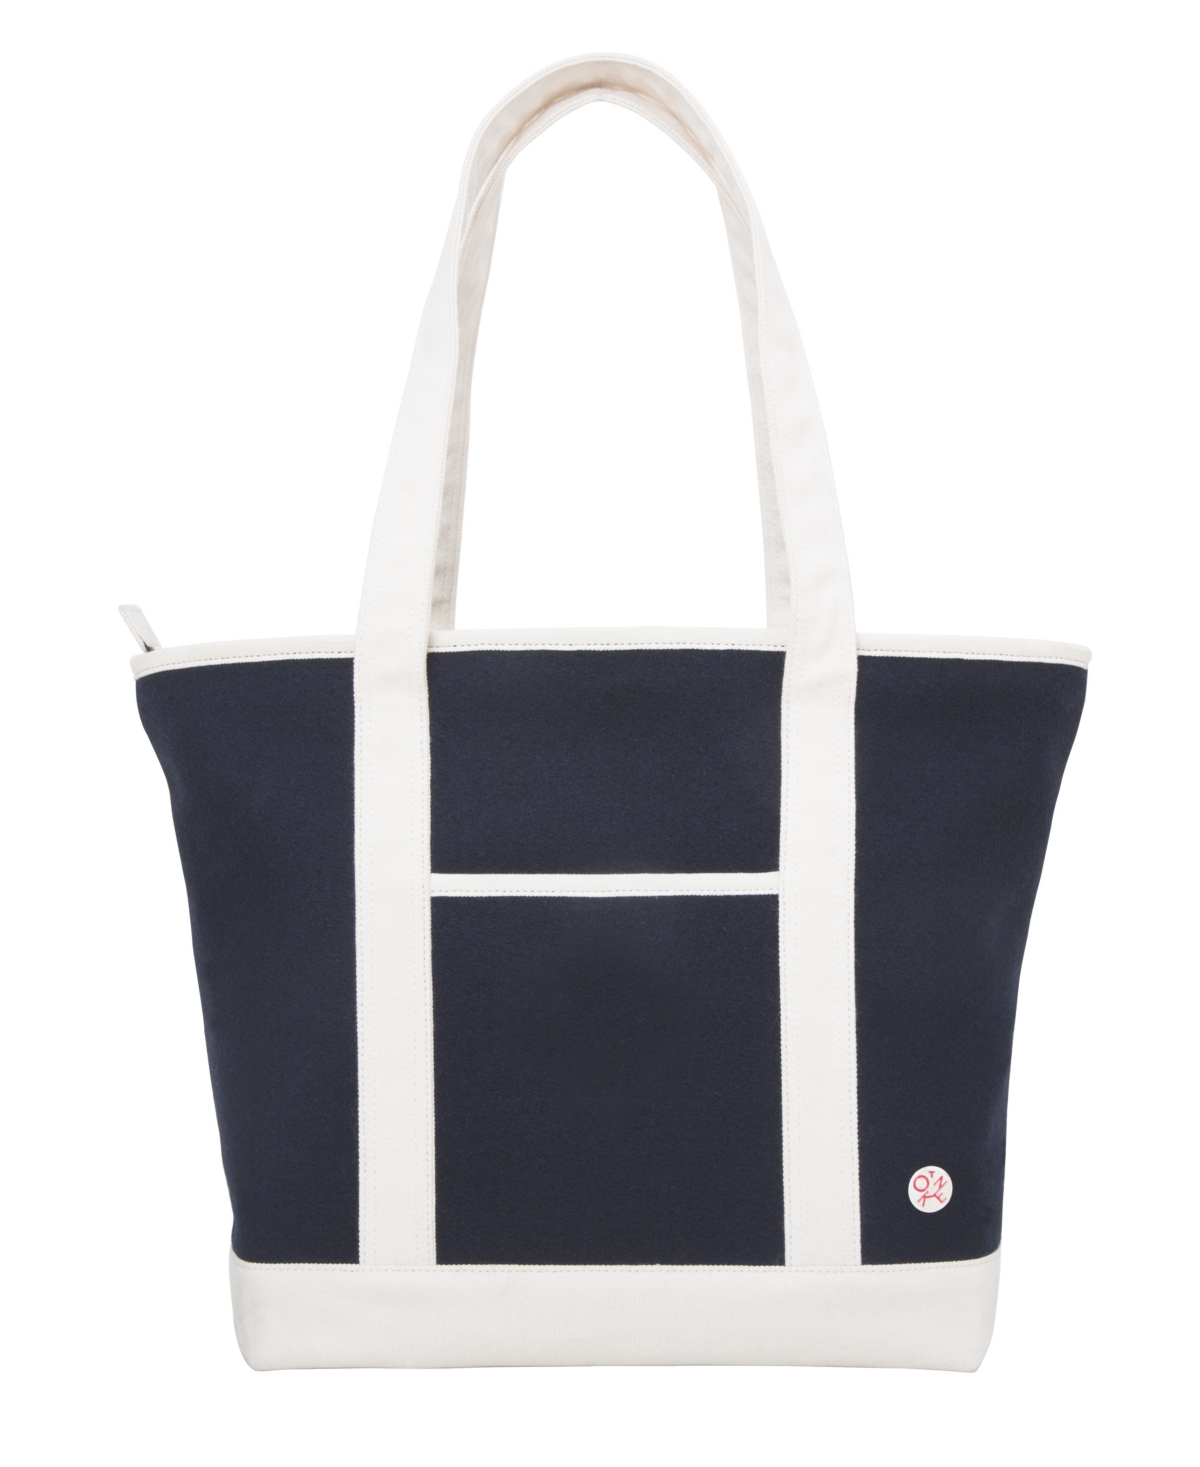 Woolrich West Point Sunnyside Tote Bag - Navy